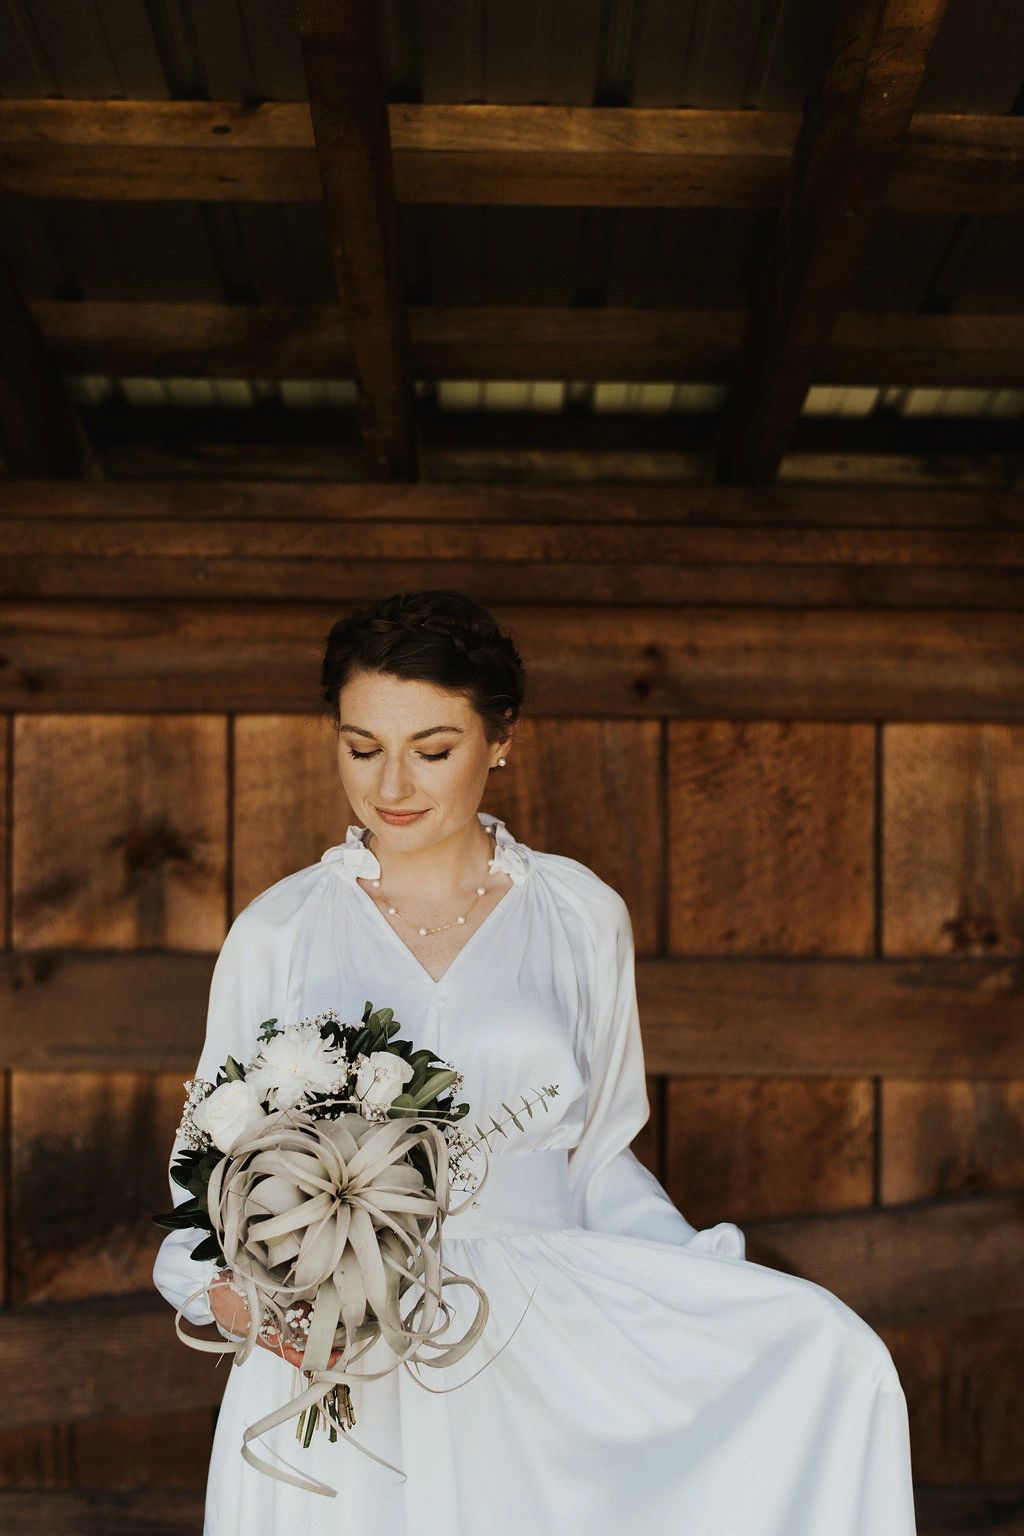 Bride holding bouquet and looking down at it
